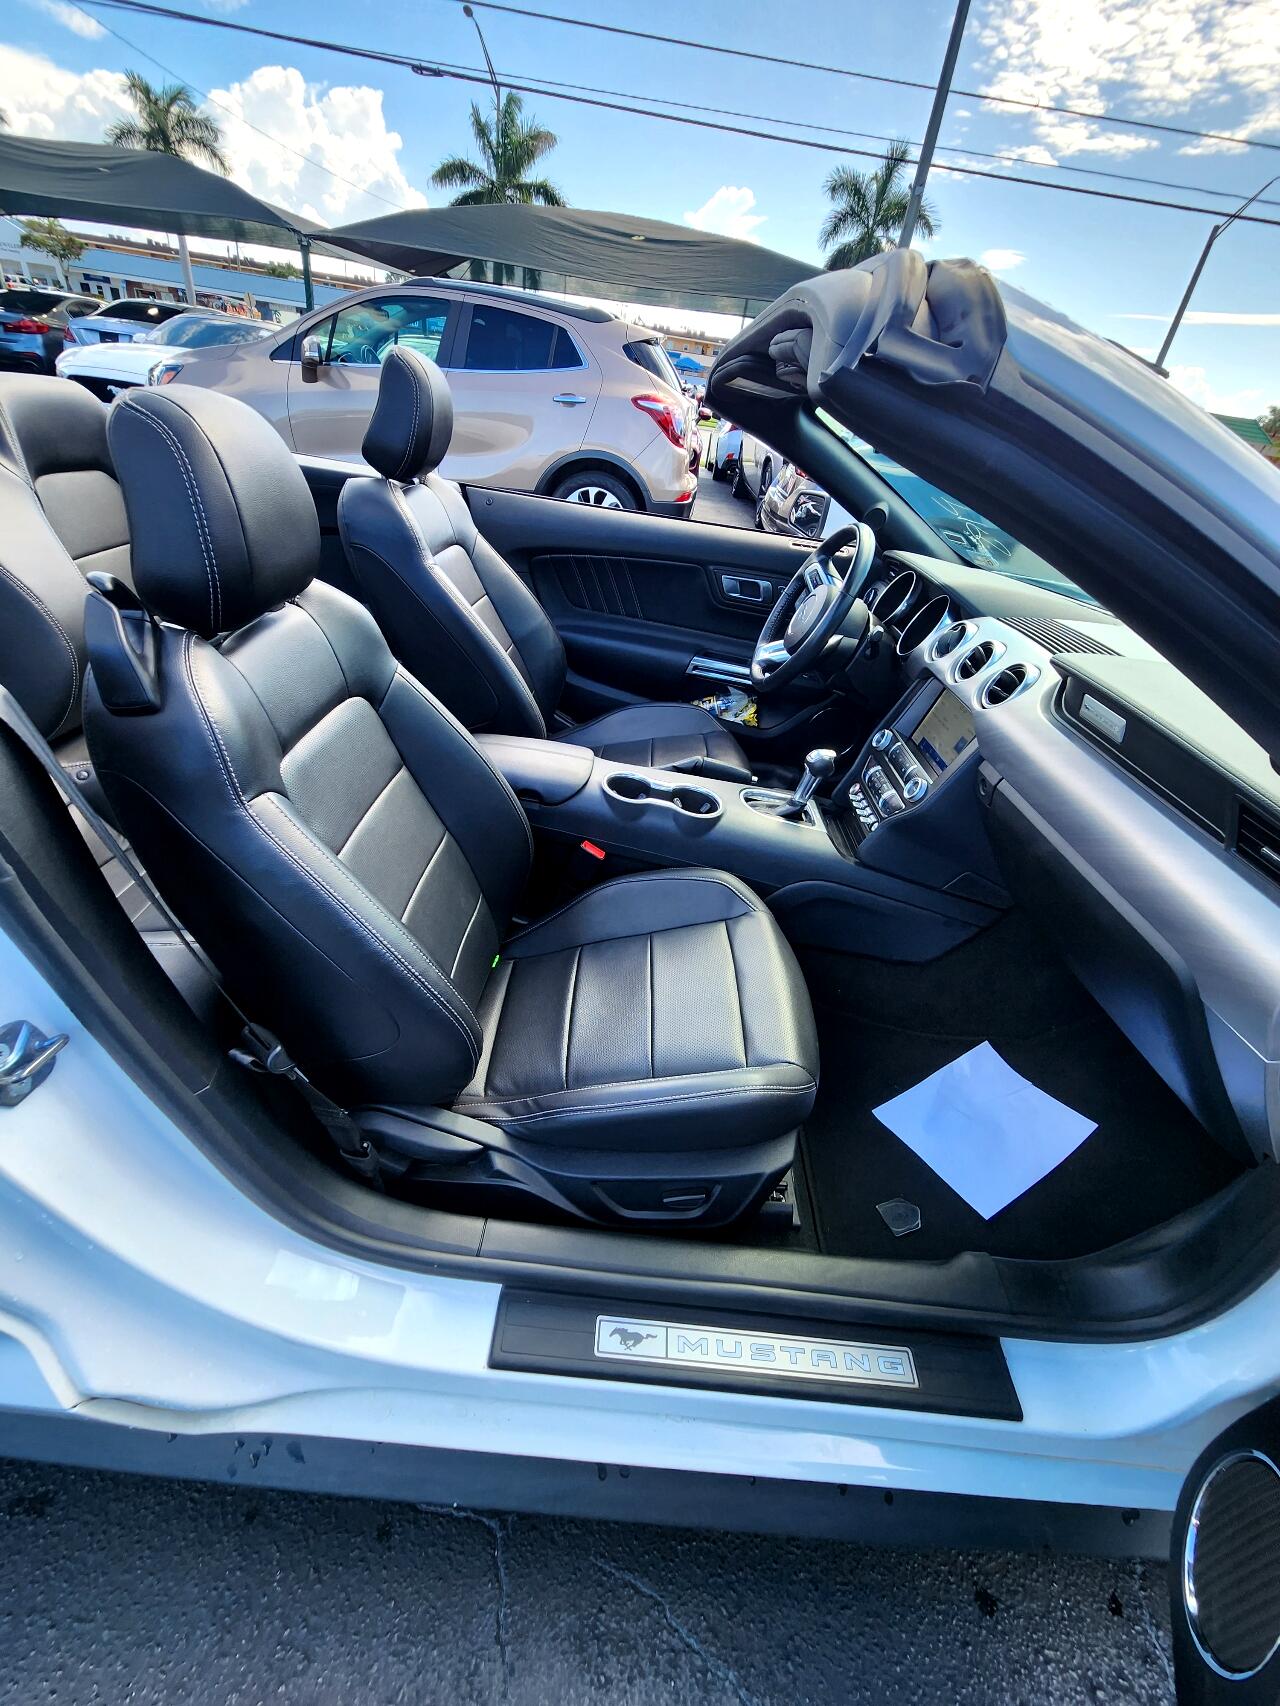 2022 FORD Mustang Convertible - $26,999